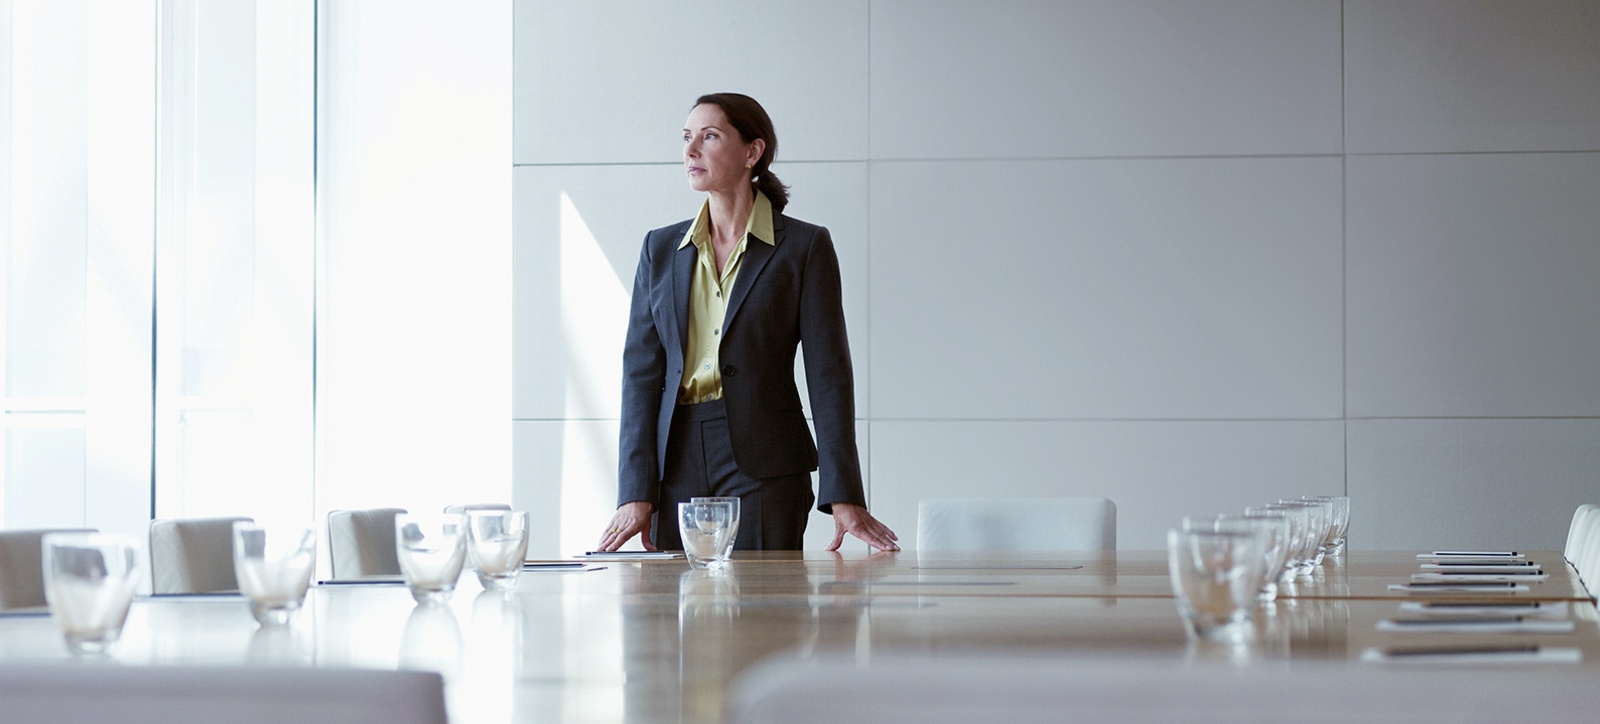 A female entrepreneur stands in an empty boardroom